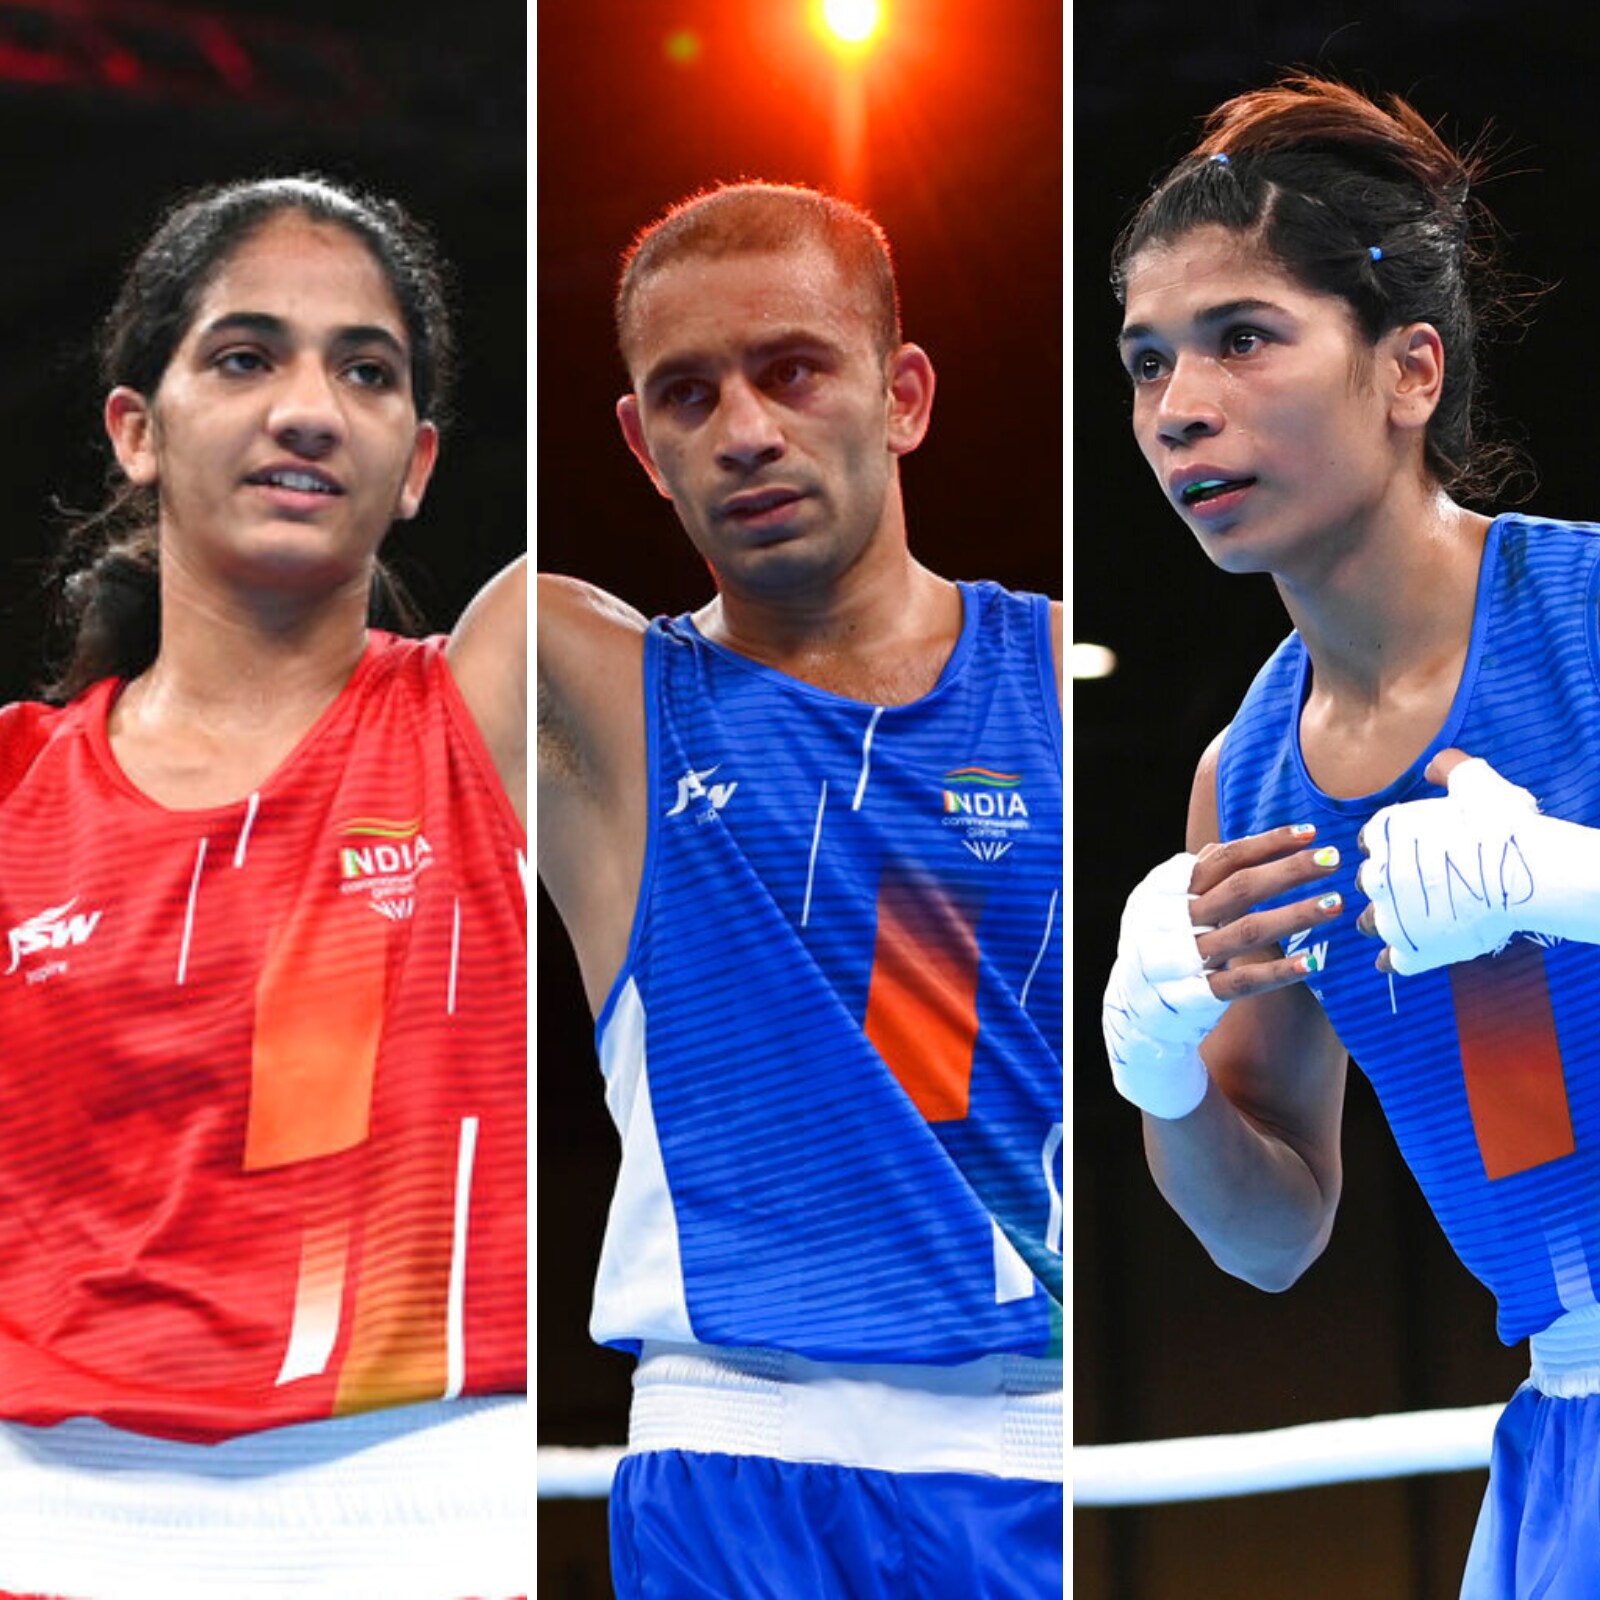 CWG 2022 Day 10 Wrap: Boxers Shine as Nikhat Zareen, Amit Panghal and Nitu Ghanghas Win Gold, India Get Silver in Cricket and Bronze in Women's Hockey